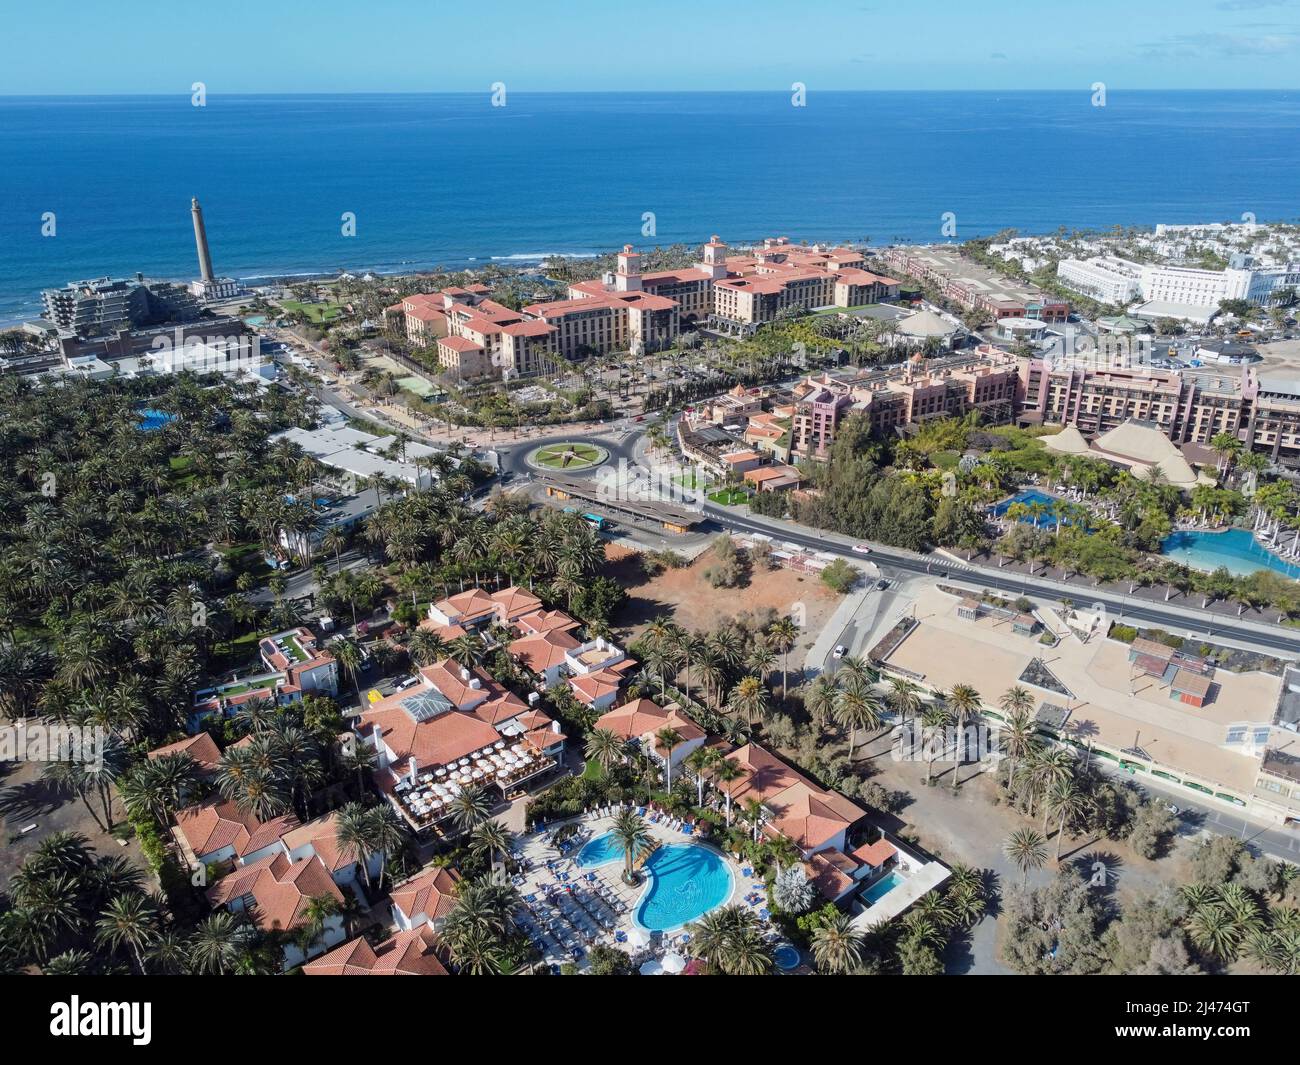 Aerial drone. Popular resort town of Meloneras, with hotels and restaurants, near the Maspalomas dunes in Gran Canaria, Canary Islands, Spain Stock Photo